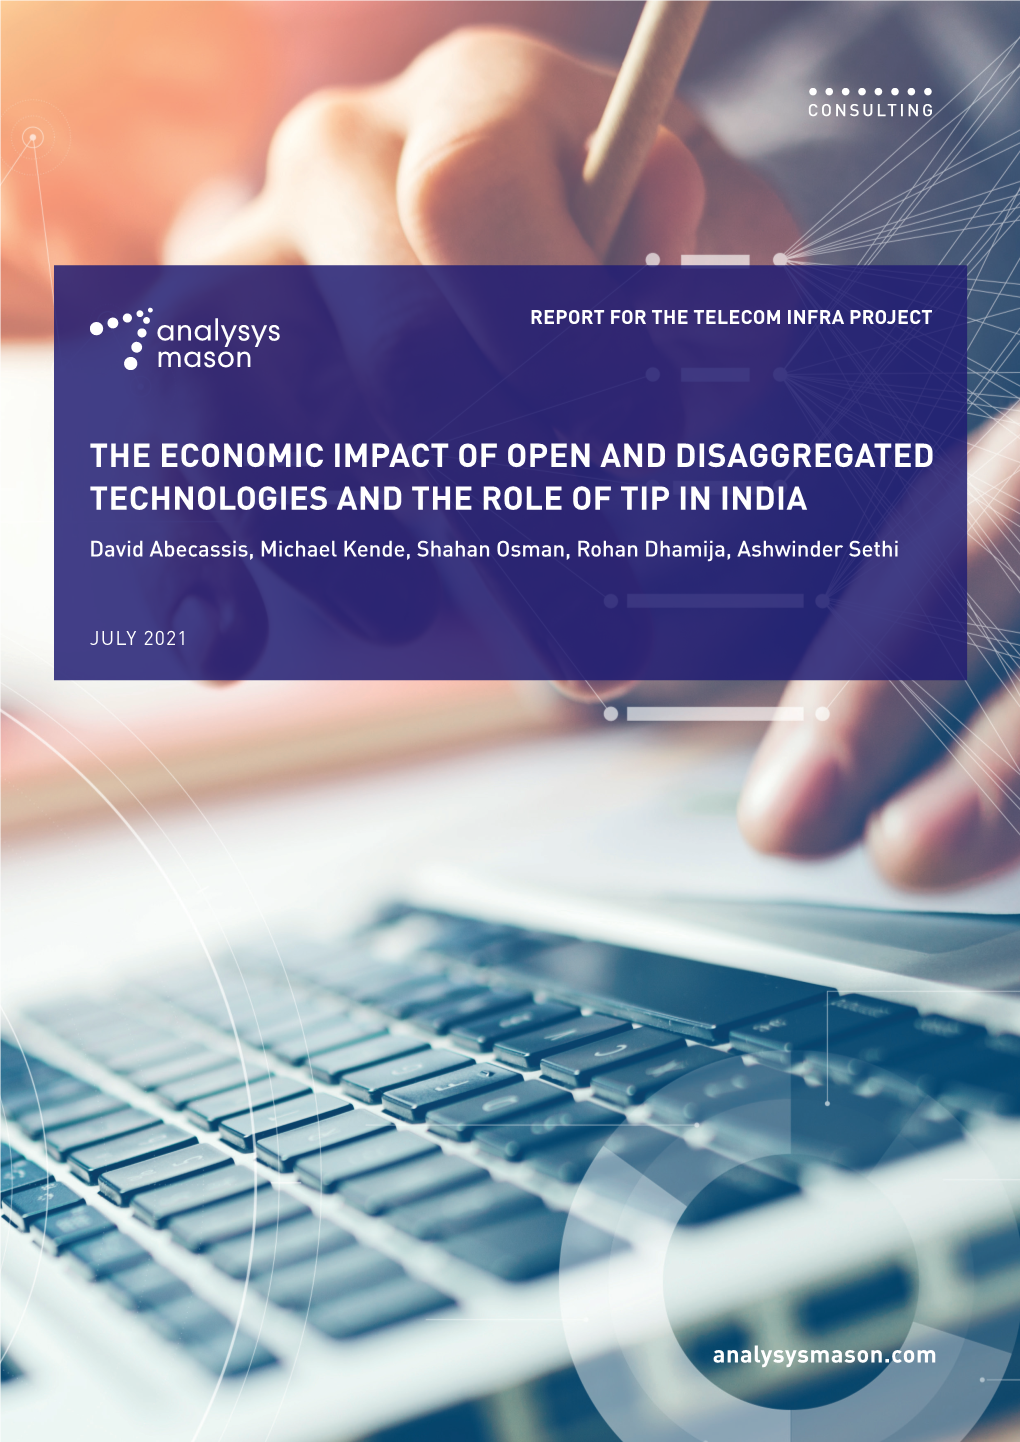 The Economic Impact of Open and Disaggregated Technologies and the Role of Tip in India C Onsulting